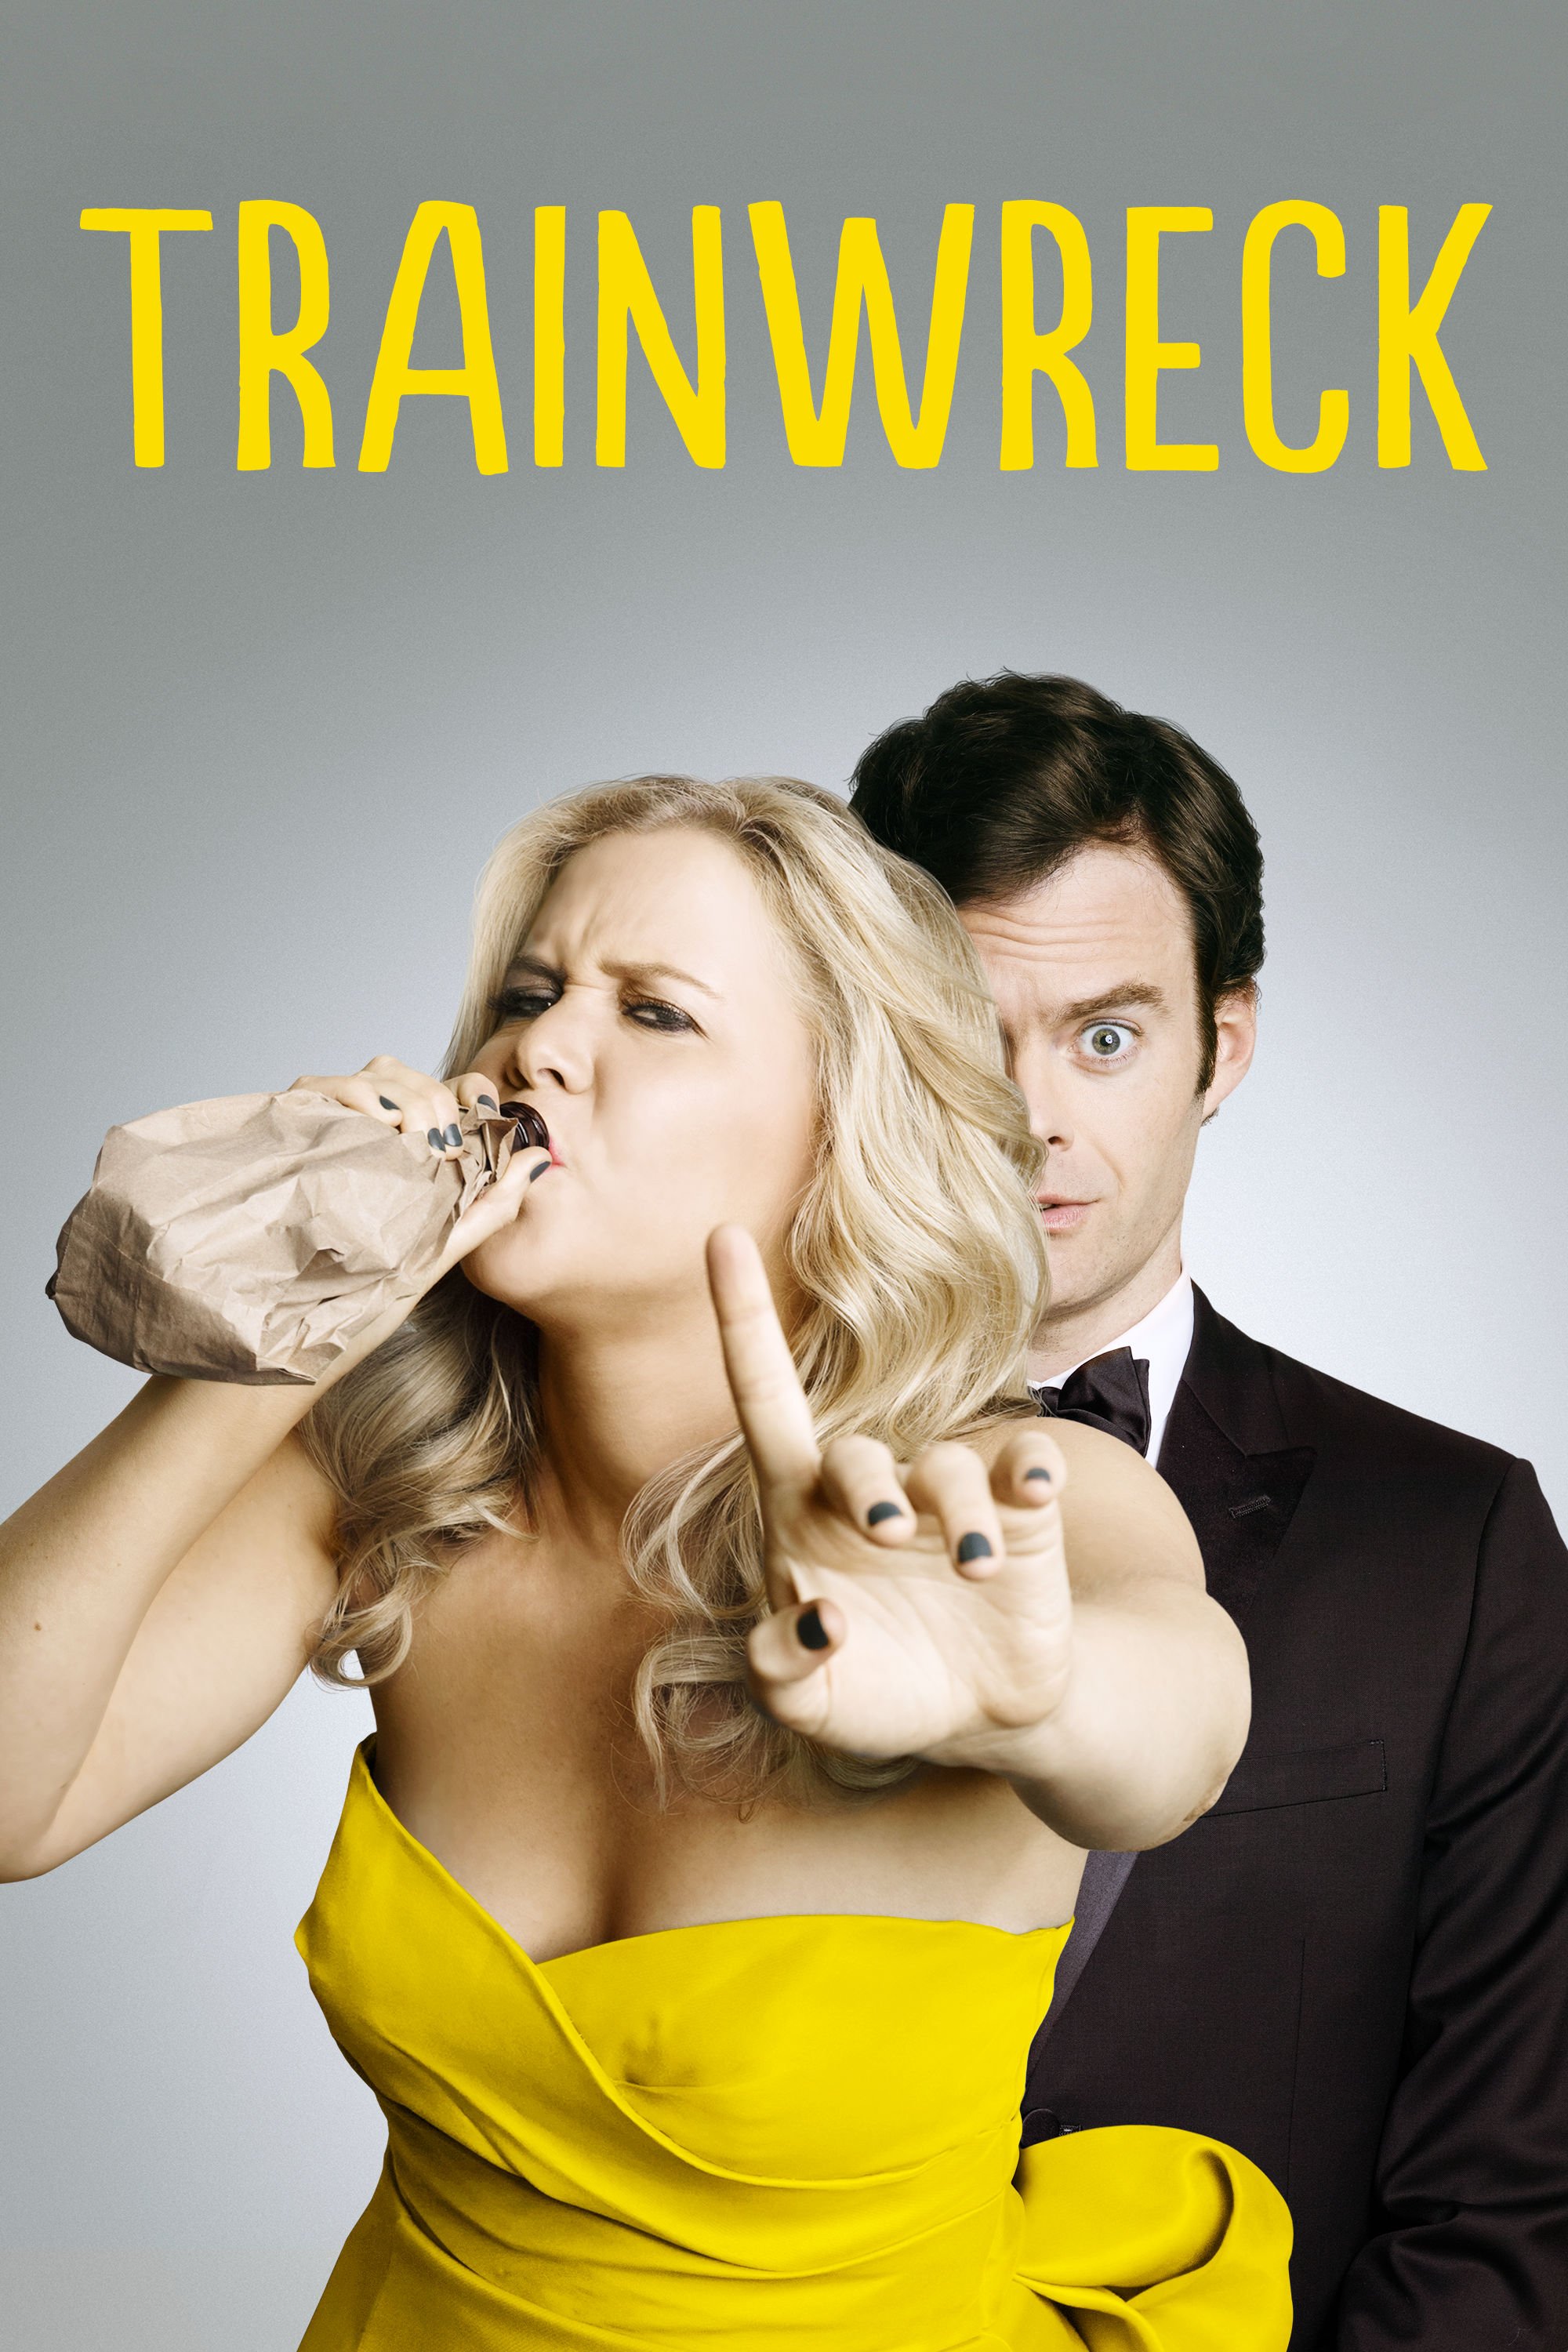 trainwreck-filming-locations-itunes-dvd-poster